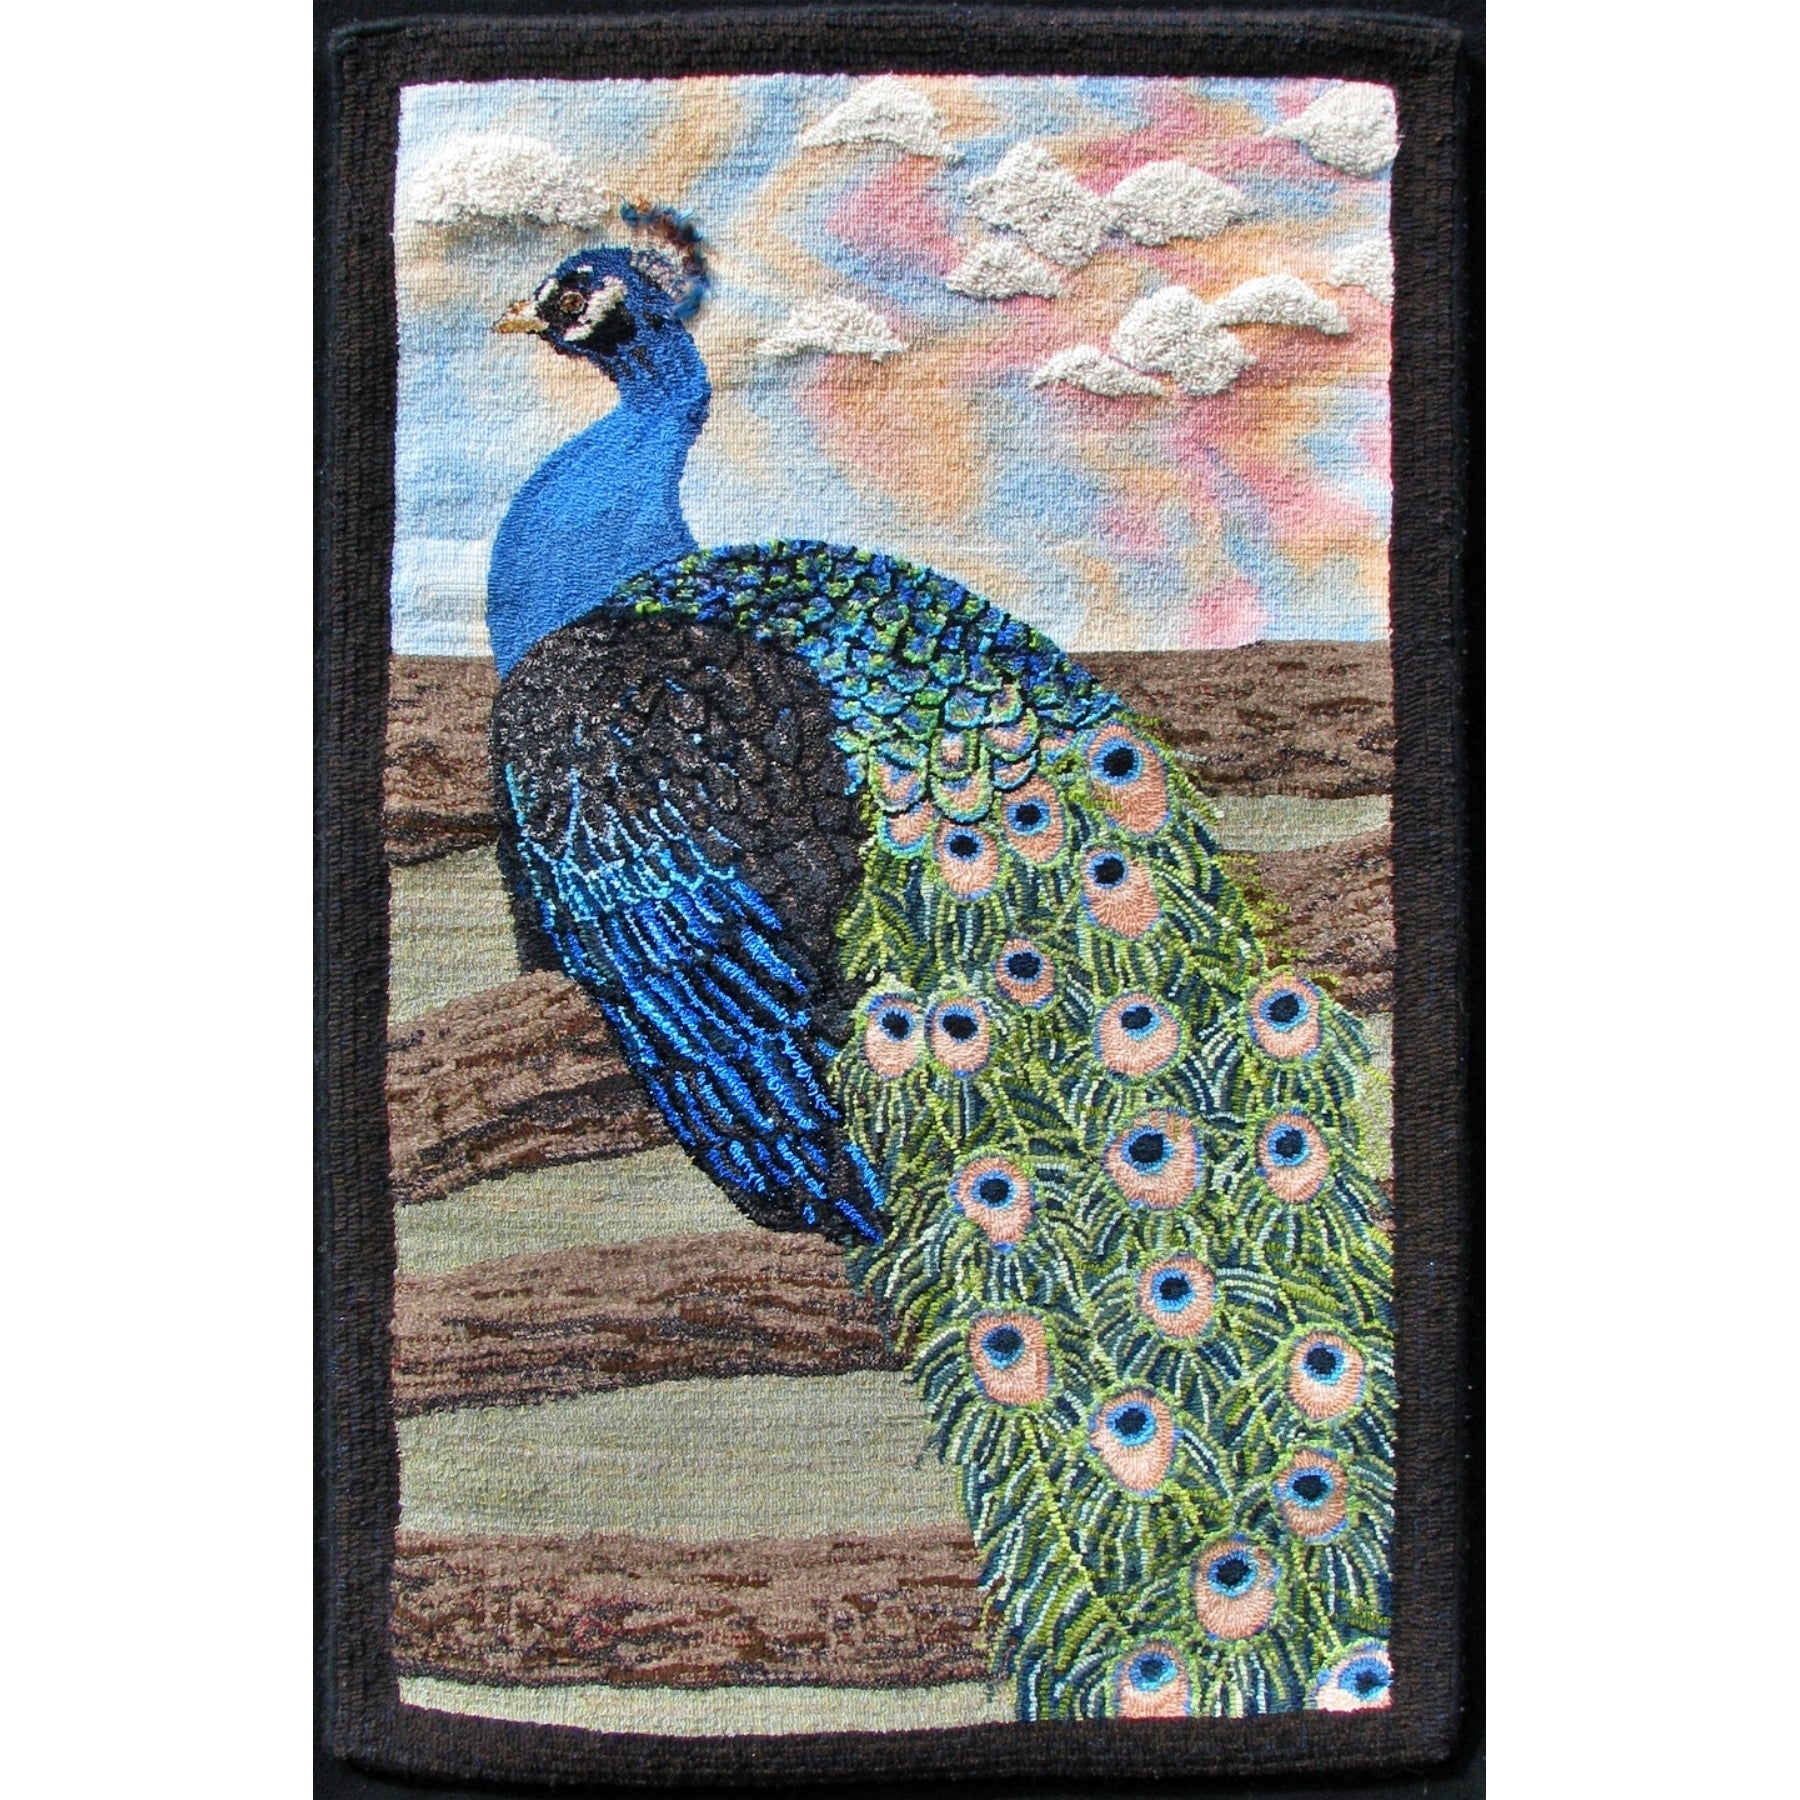 Proud Peacock, rug hooked by Judy Carter